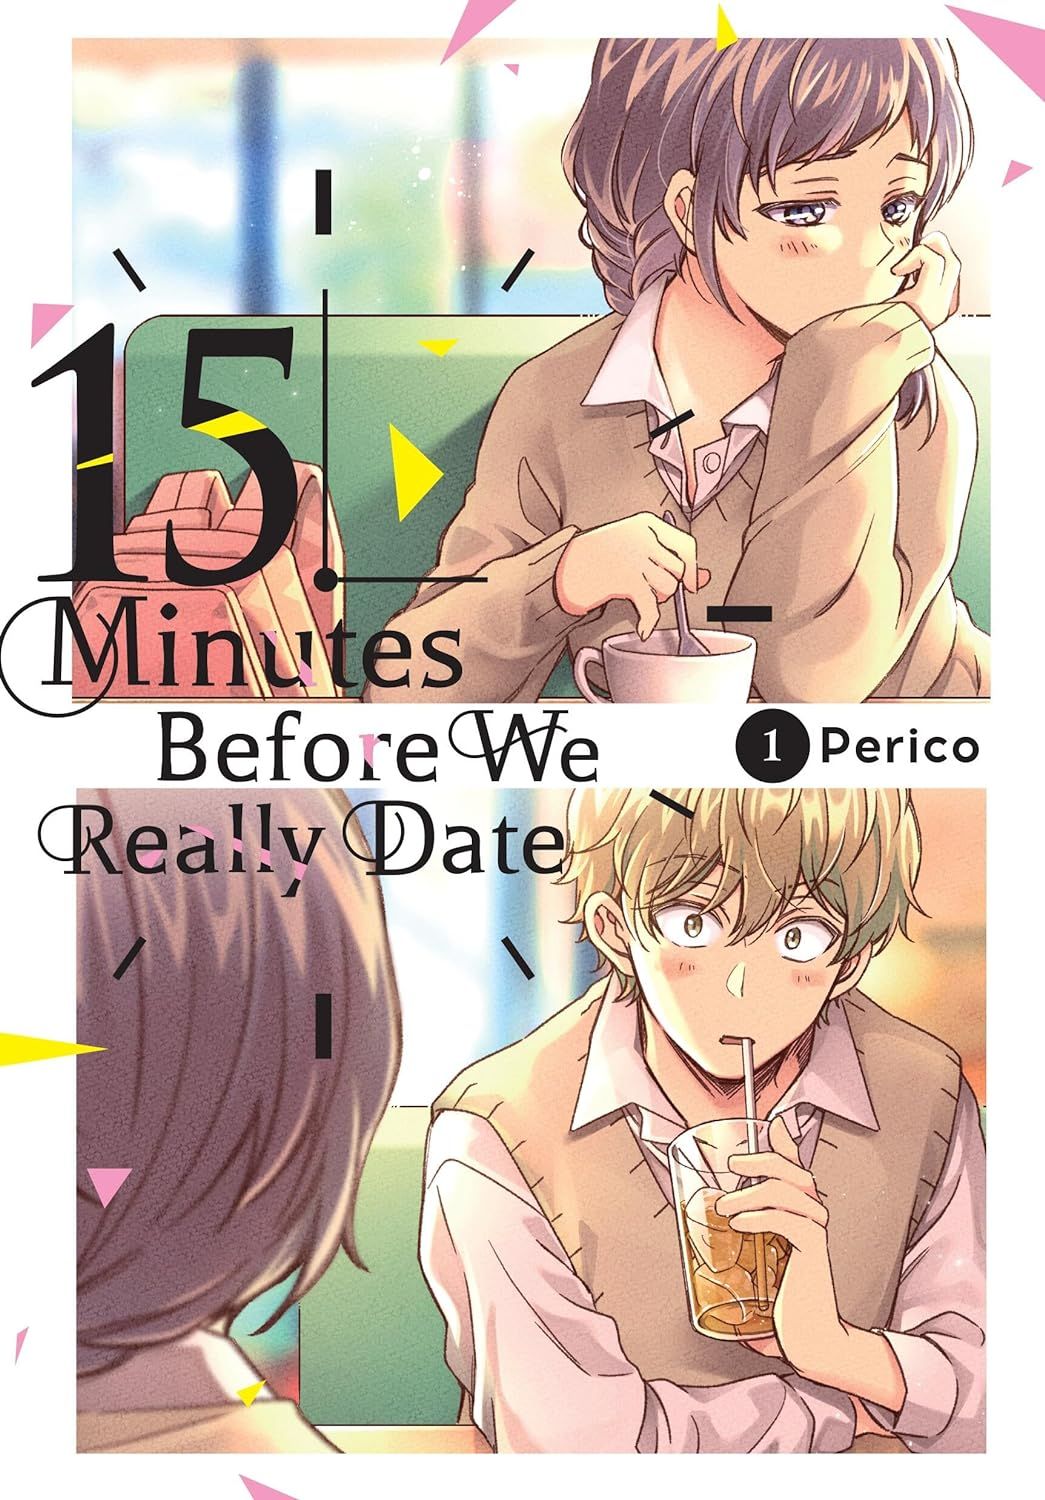 15 Minutes Before We Really Date by Perico cover